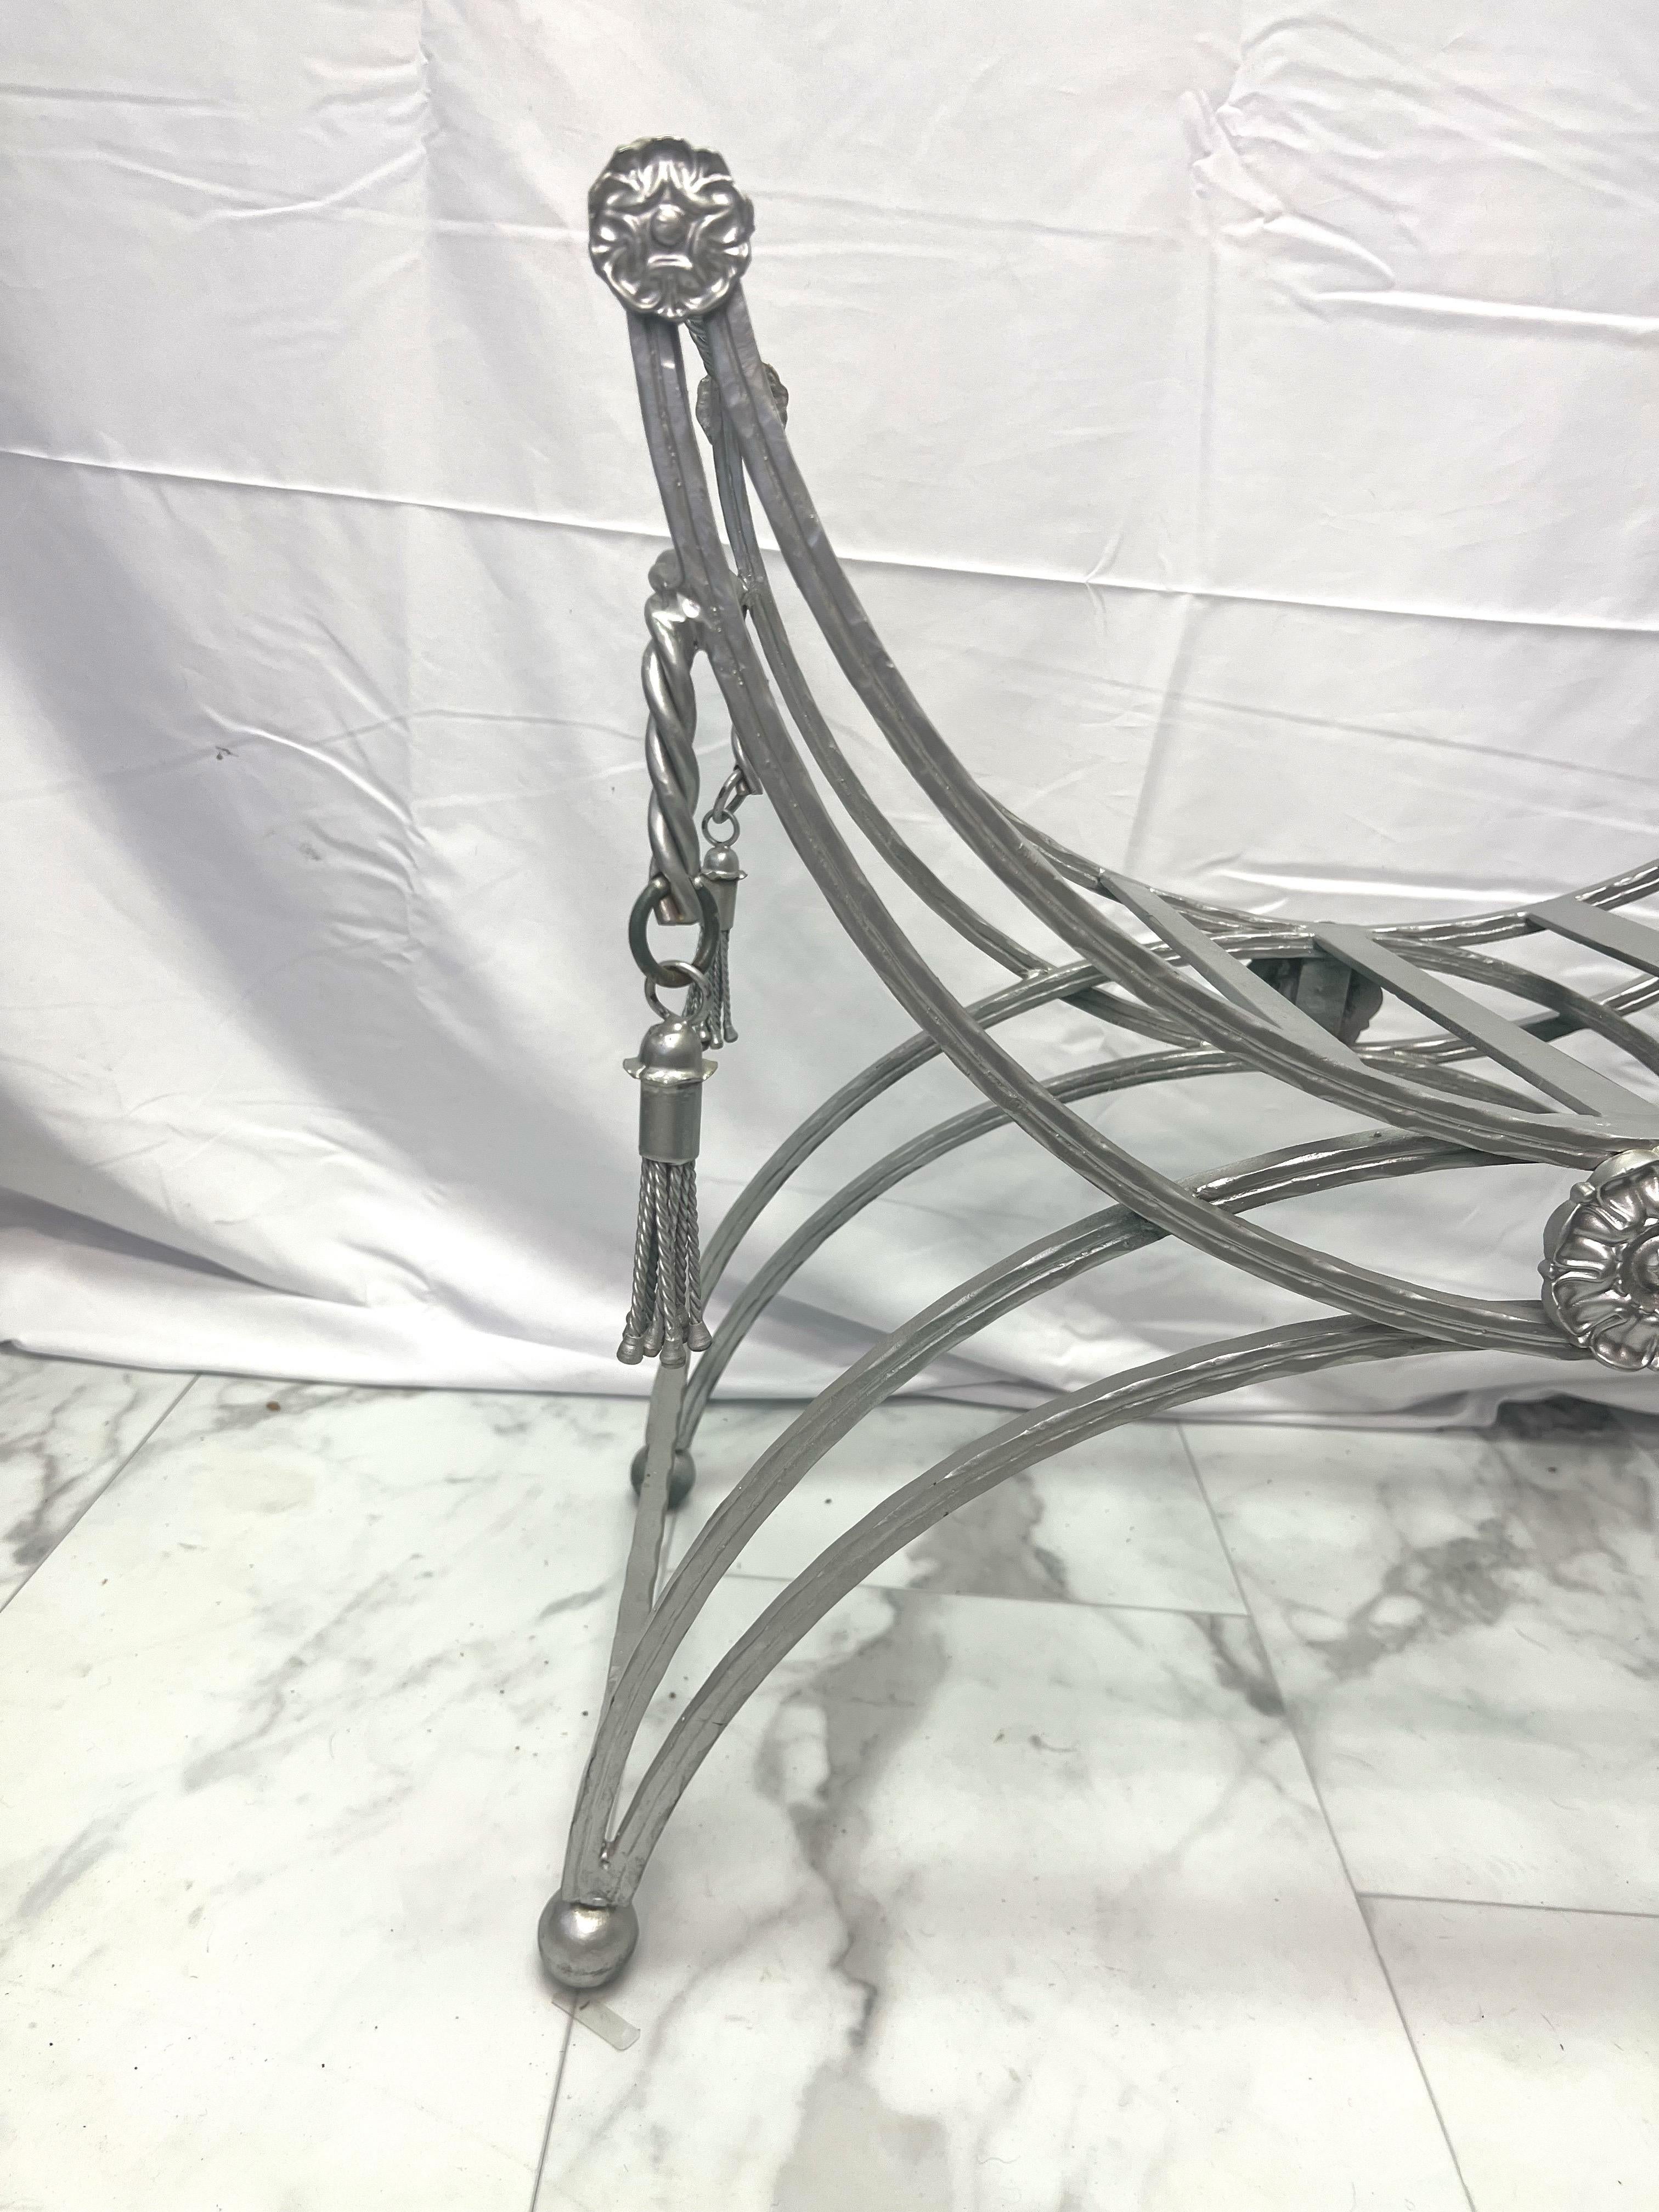 Very heavy iron or steel bench attributed to Maison Jansen.  French Mid-Century steel frame vanity stool with   metal rope and tassels on all 4 corners and metal rosette’s adorning the stool. with attached curved legs ending in ball finials, and a